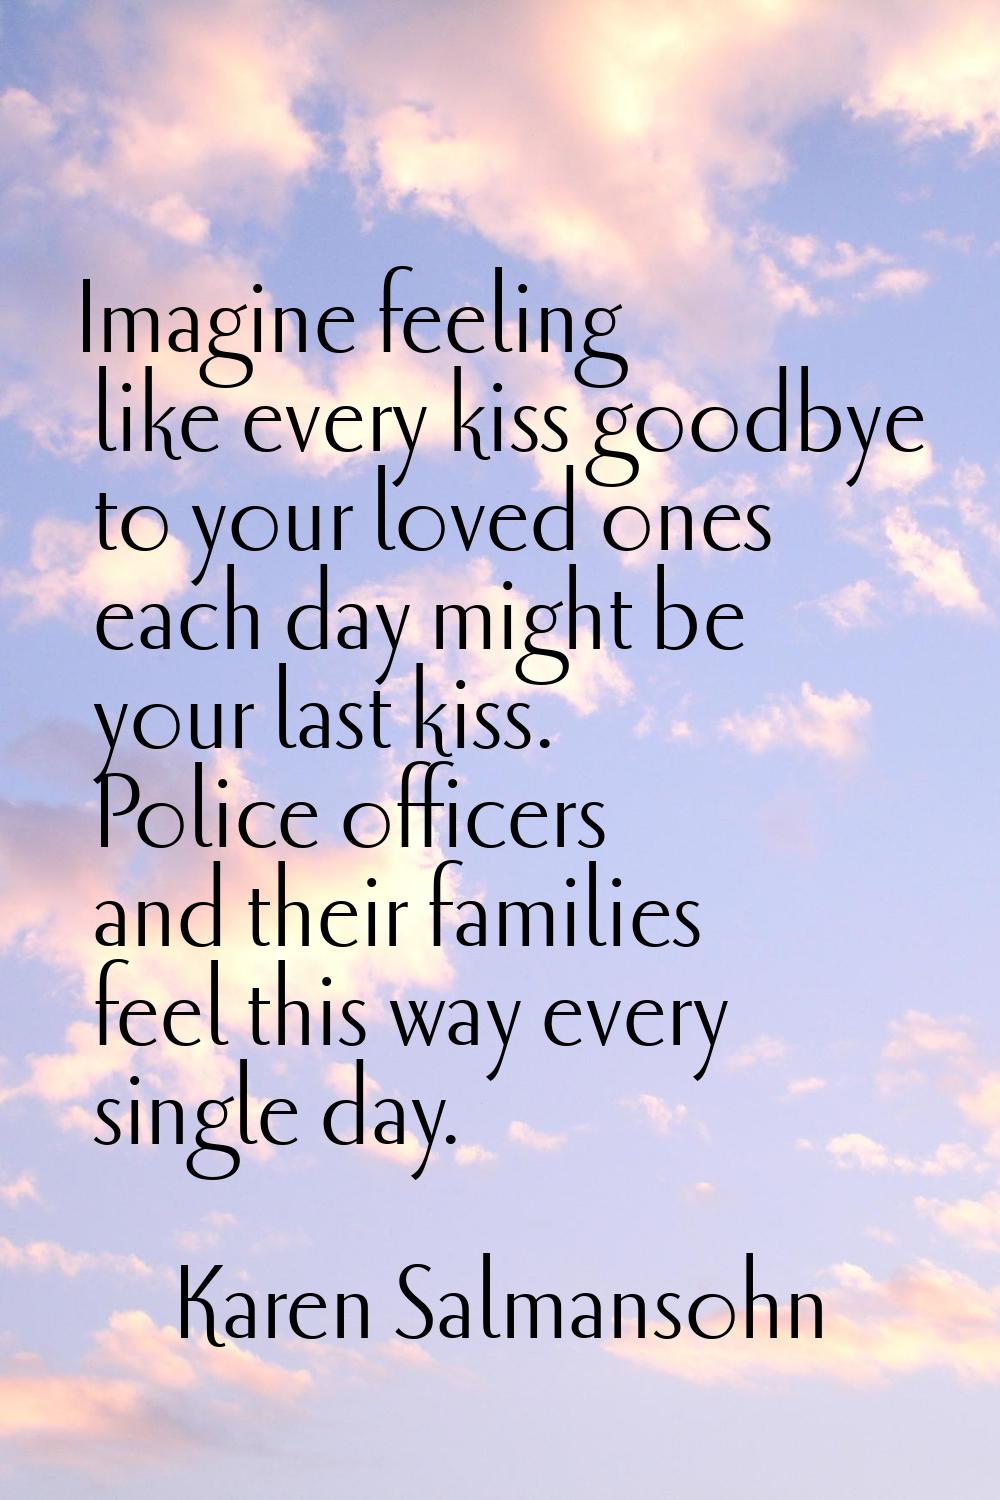 Imagine feeling like every kiss goodbye to your loved ones each day might be your last kiss. Police